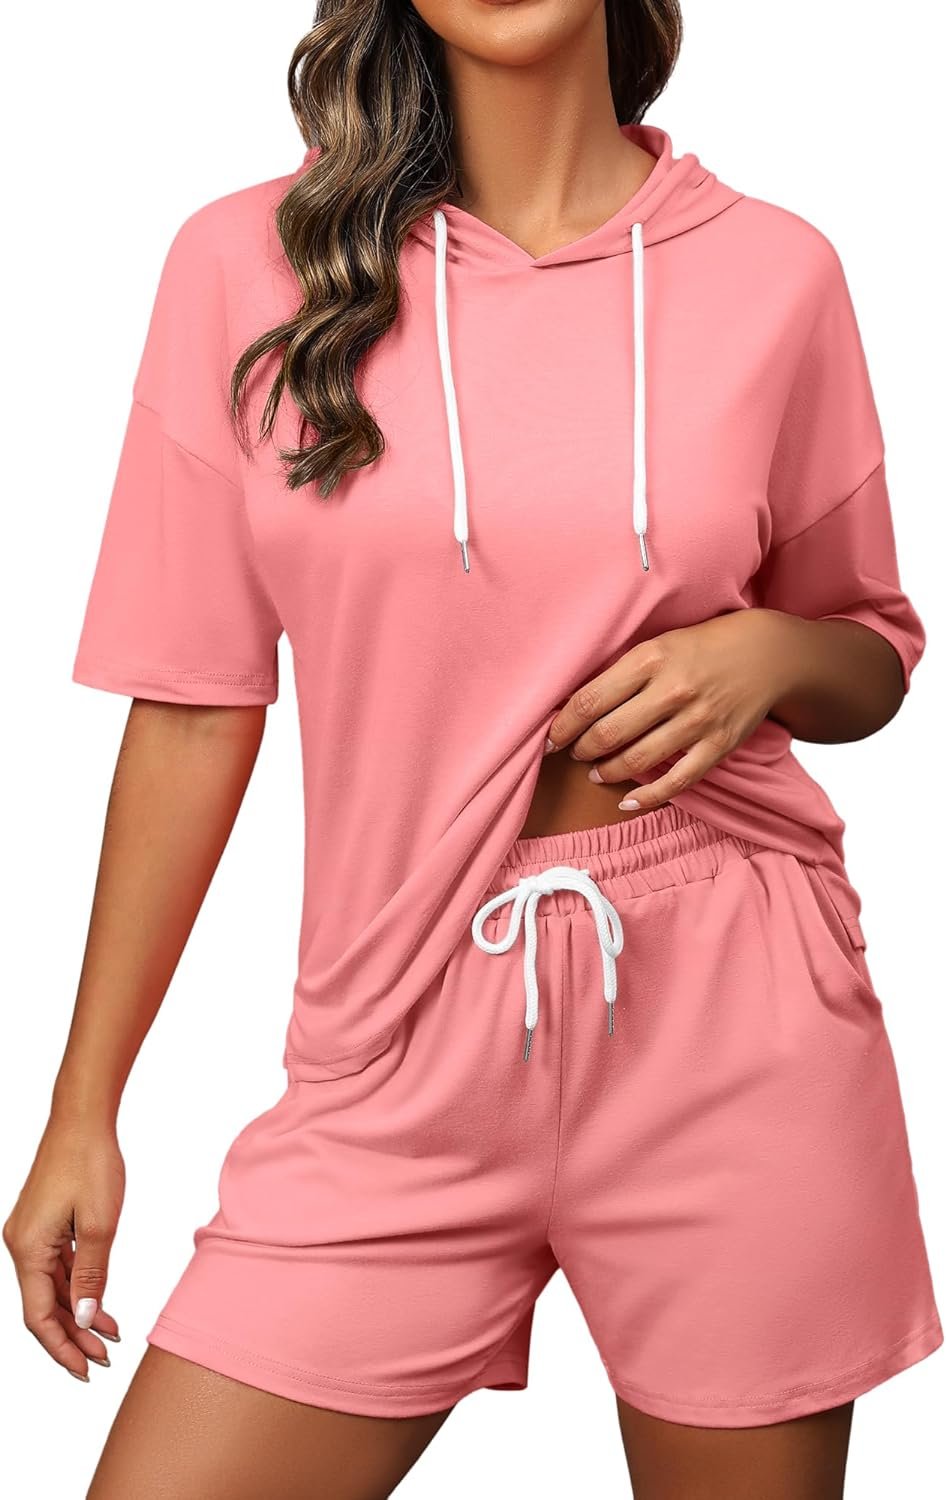 FUPHINE Womens Two Piece Outfits Shorts Sets Summer Sweatsuit Sets Short Sleeve Hoodie and Bottoms Loungewear with Pocket